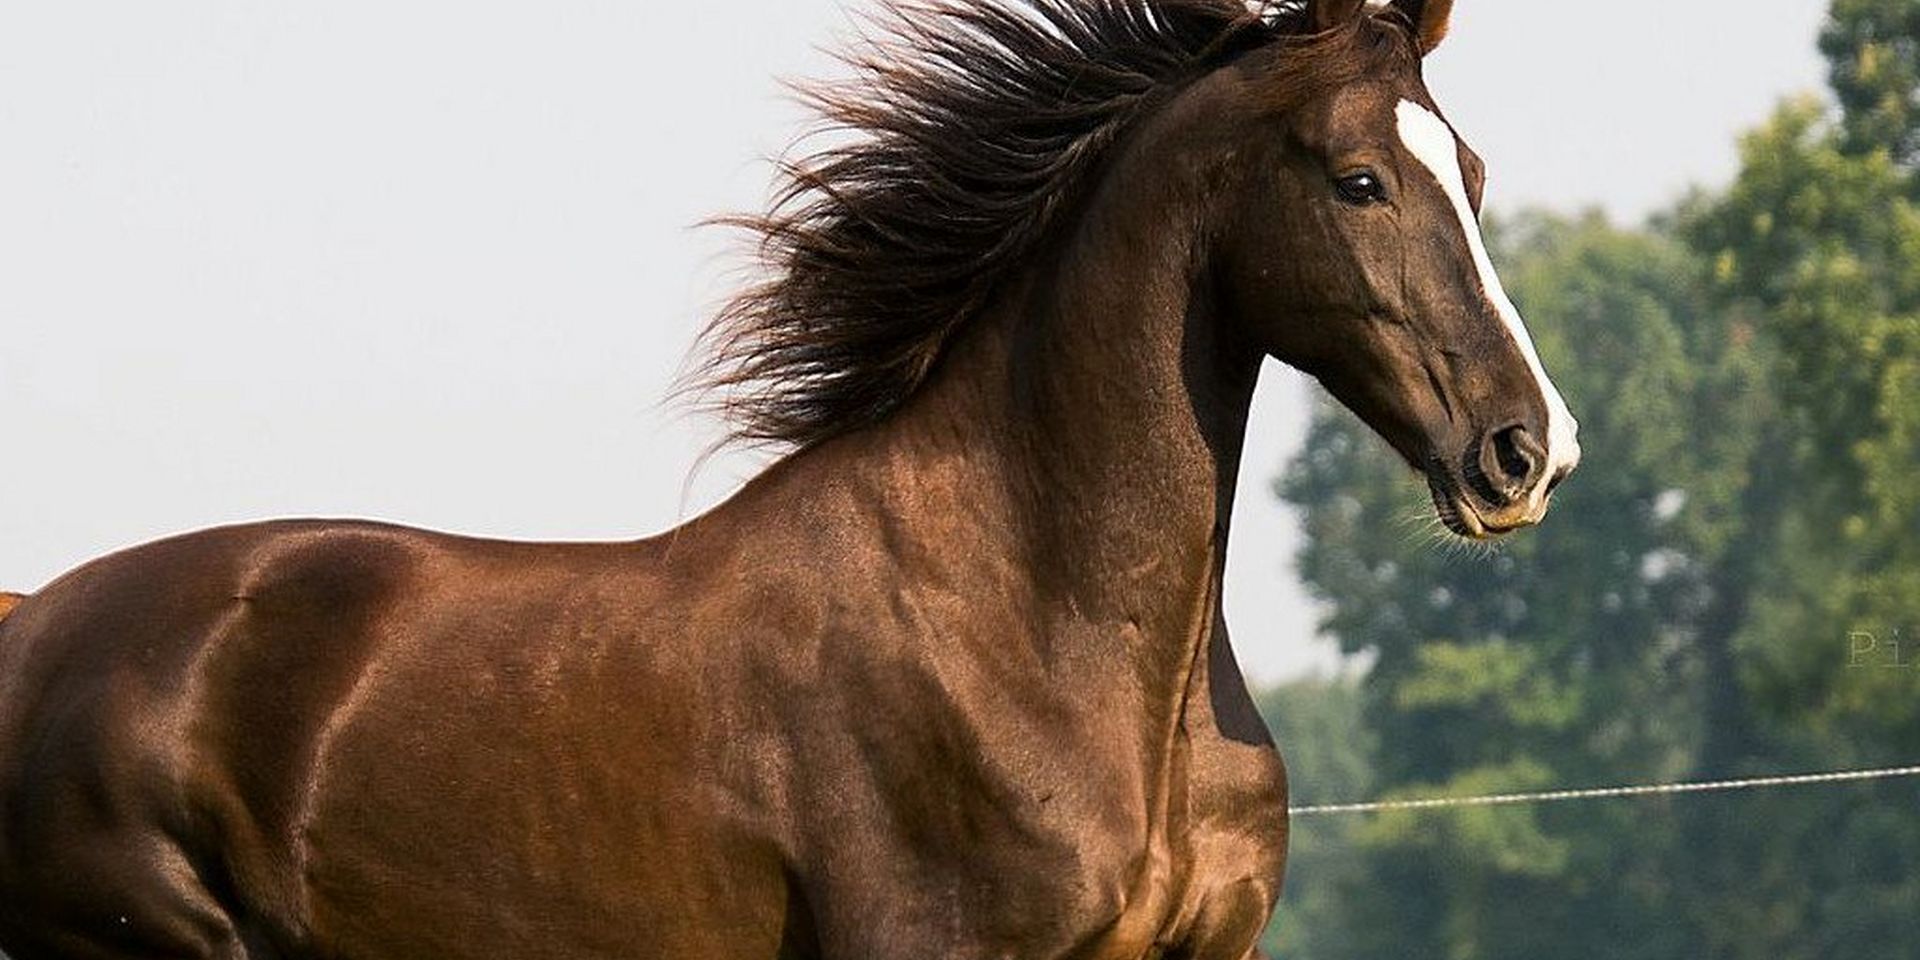  Horse Breeds and Types - Finding The Right Horse